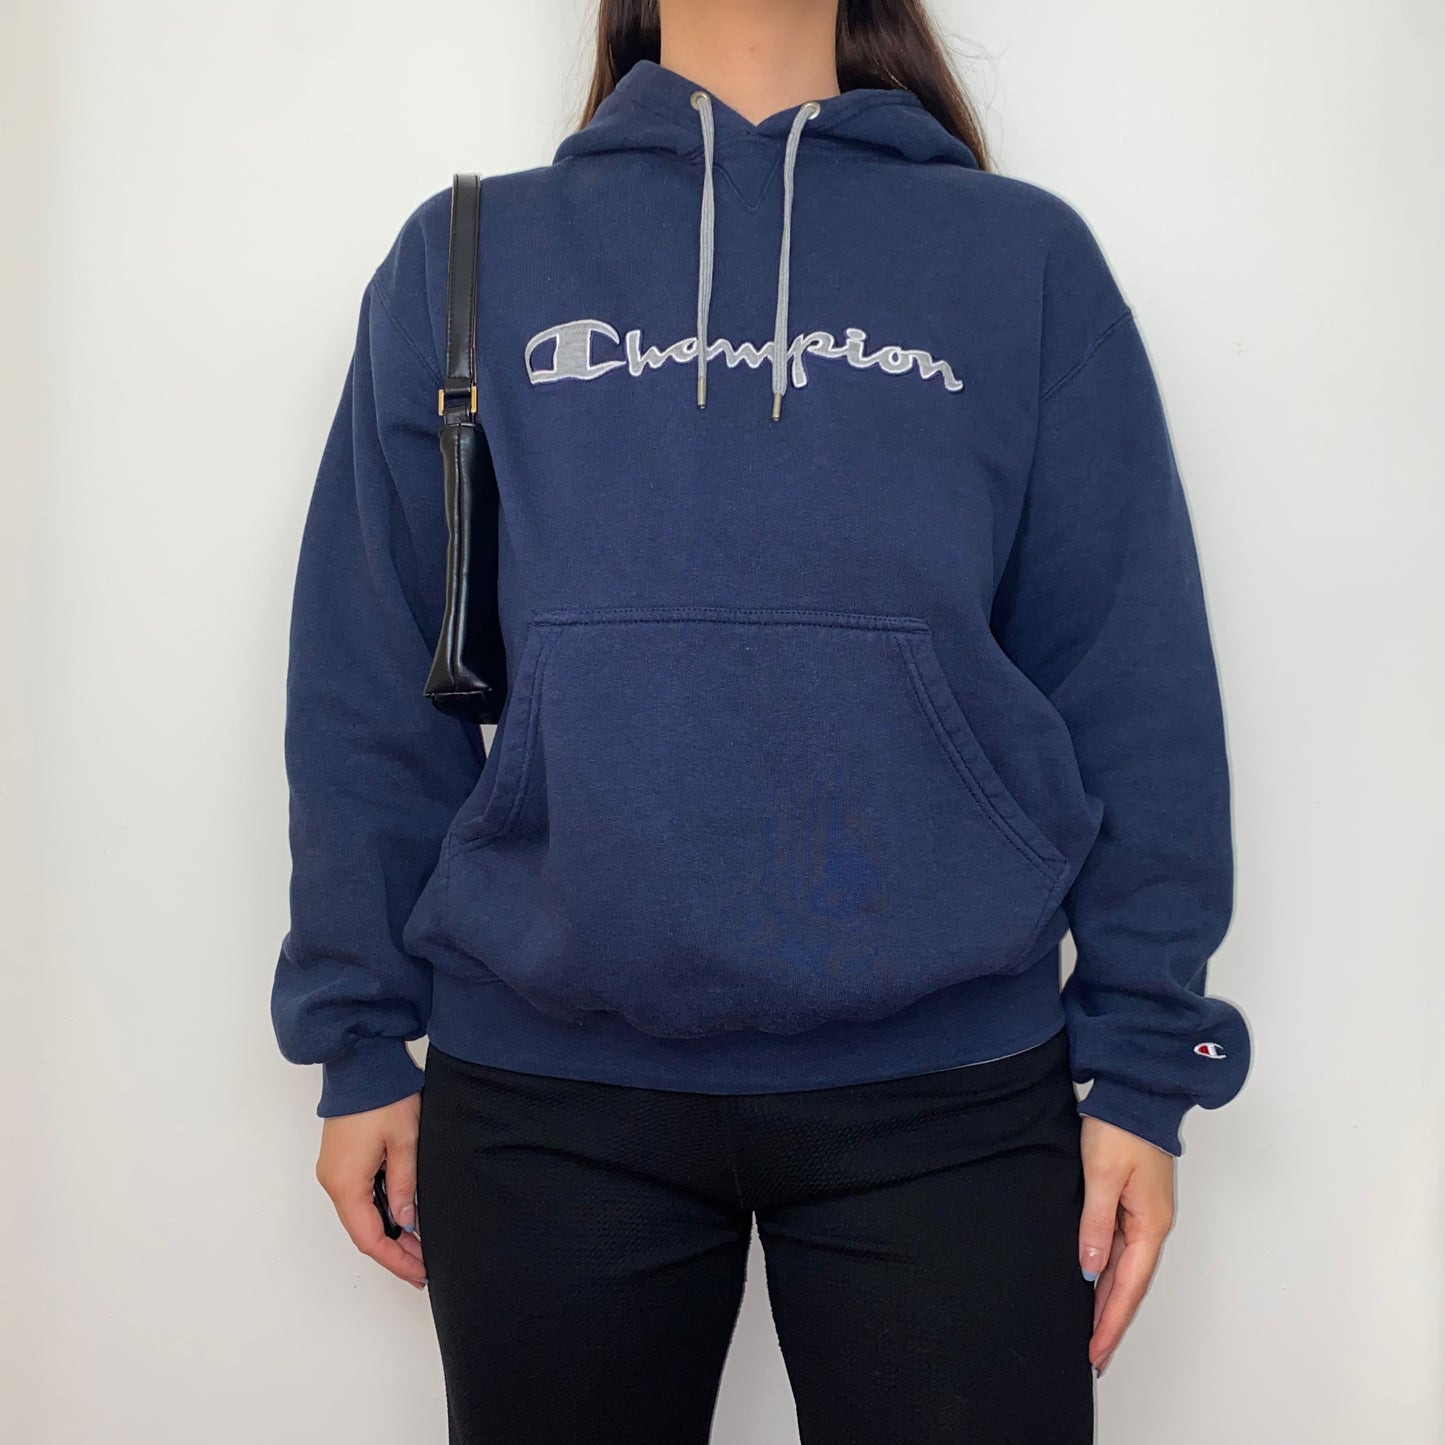 navy blue hoodie with big text champion logo shown on a model wearing black trousers and a black shoulder bag